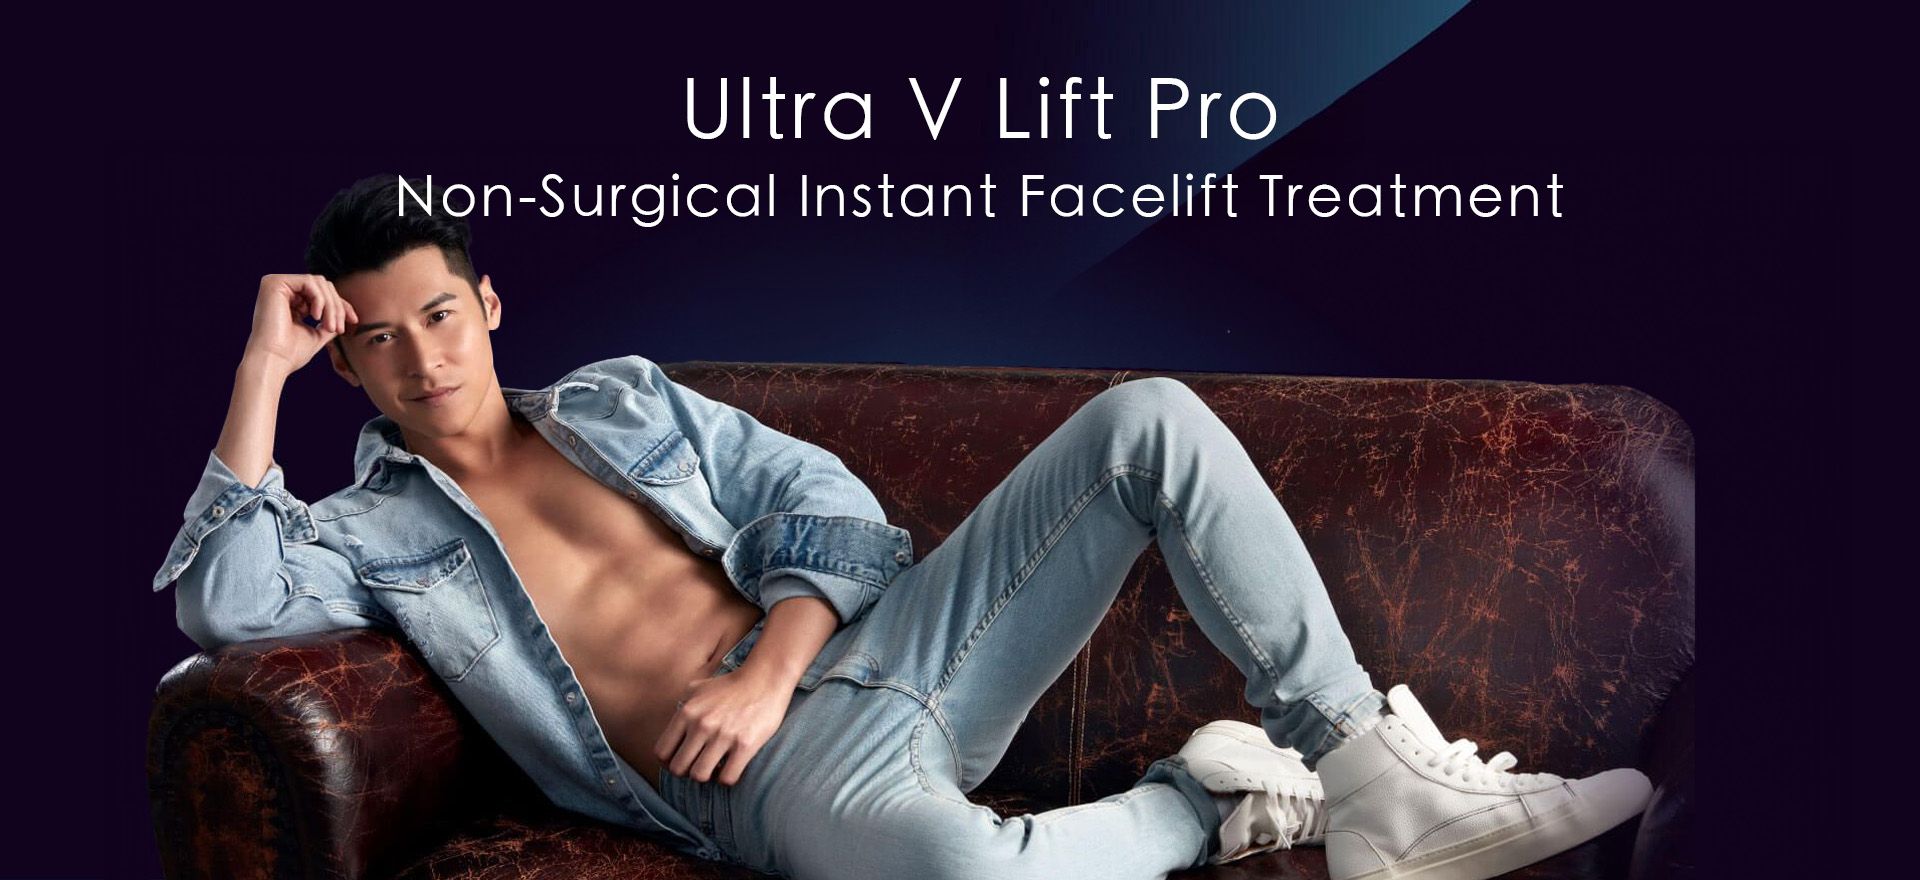 Ultra V Lift Pro Non-Surgical Instant Facelift